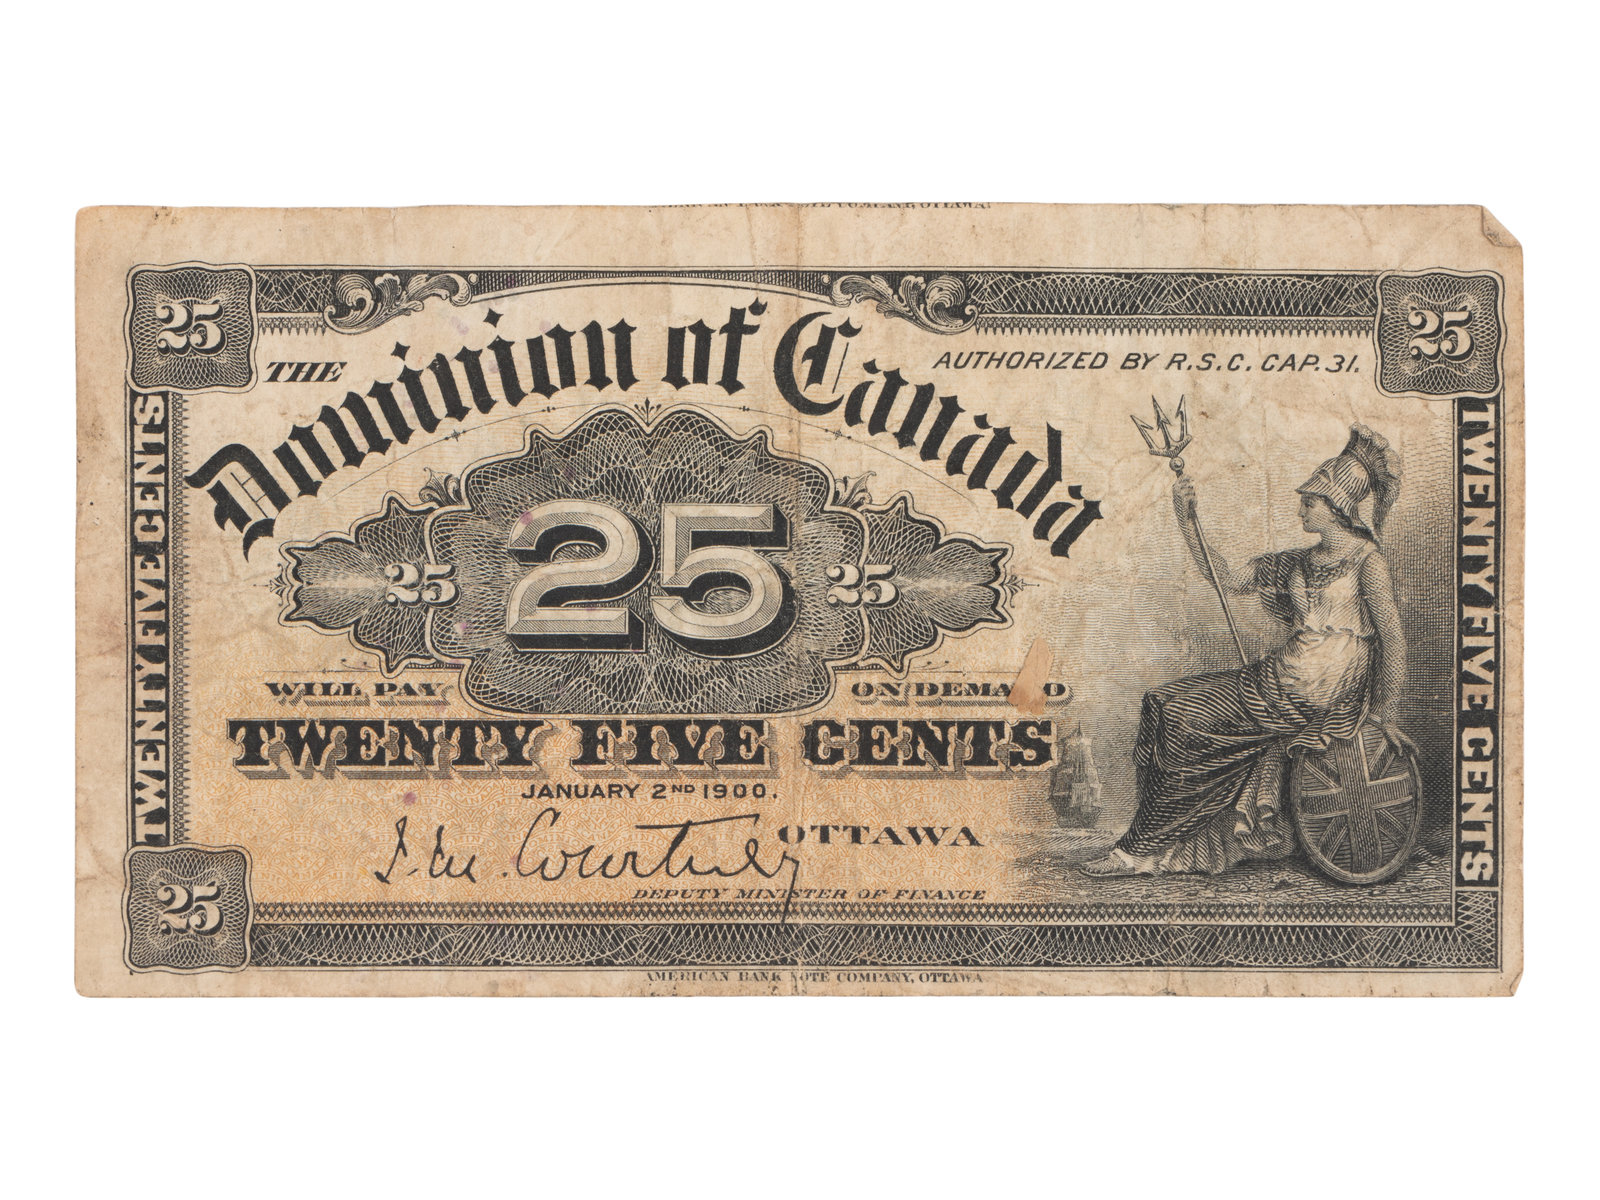 Continental Currency: February 17, 1776